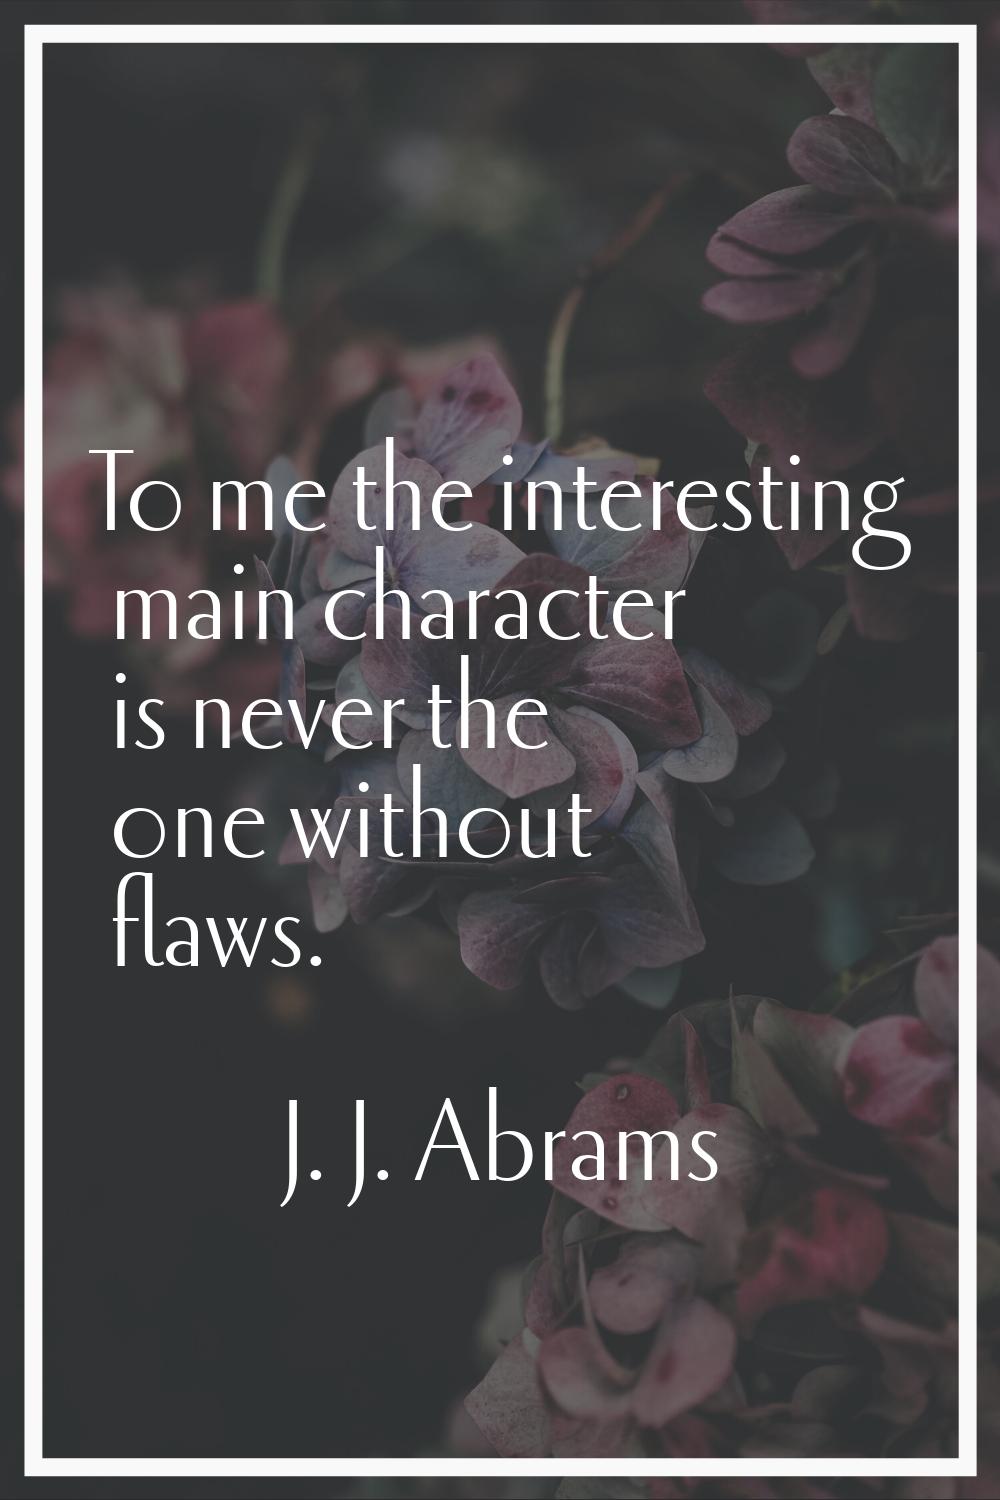 To me the interesting main character is never the one without flaws.